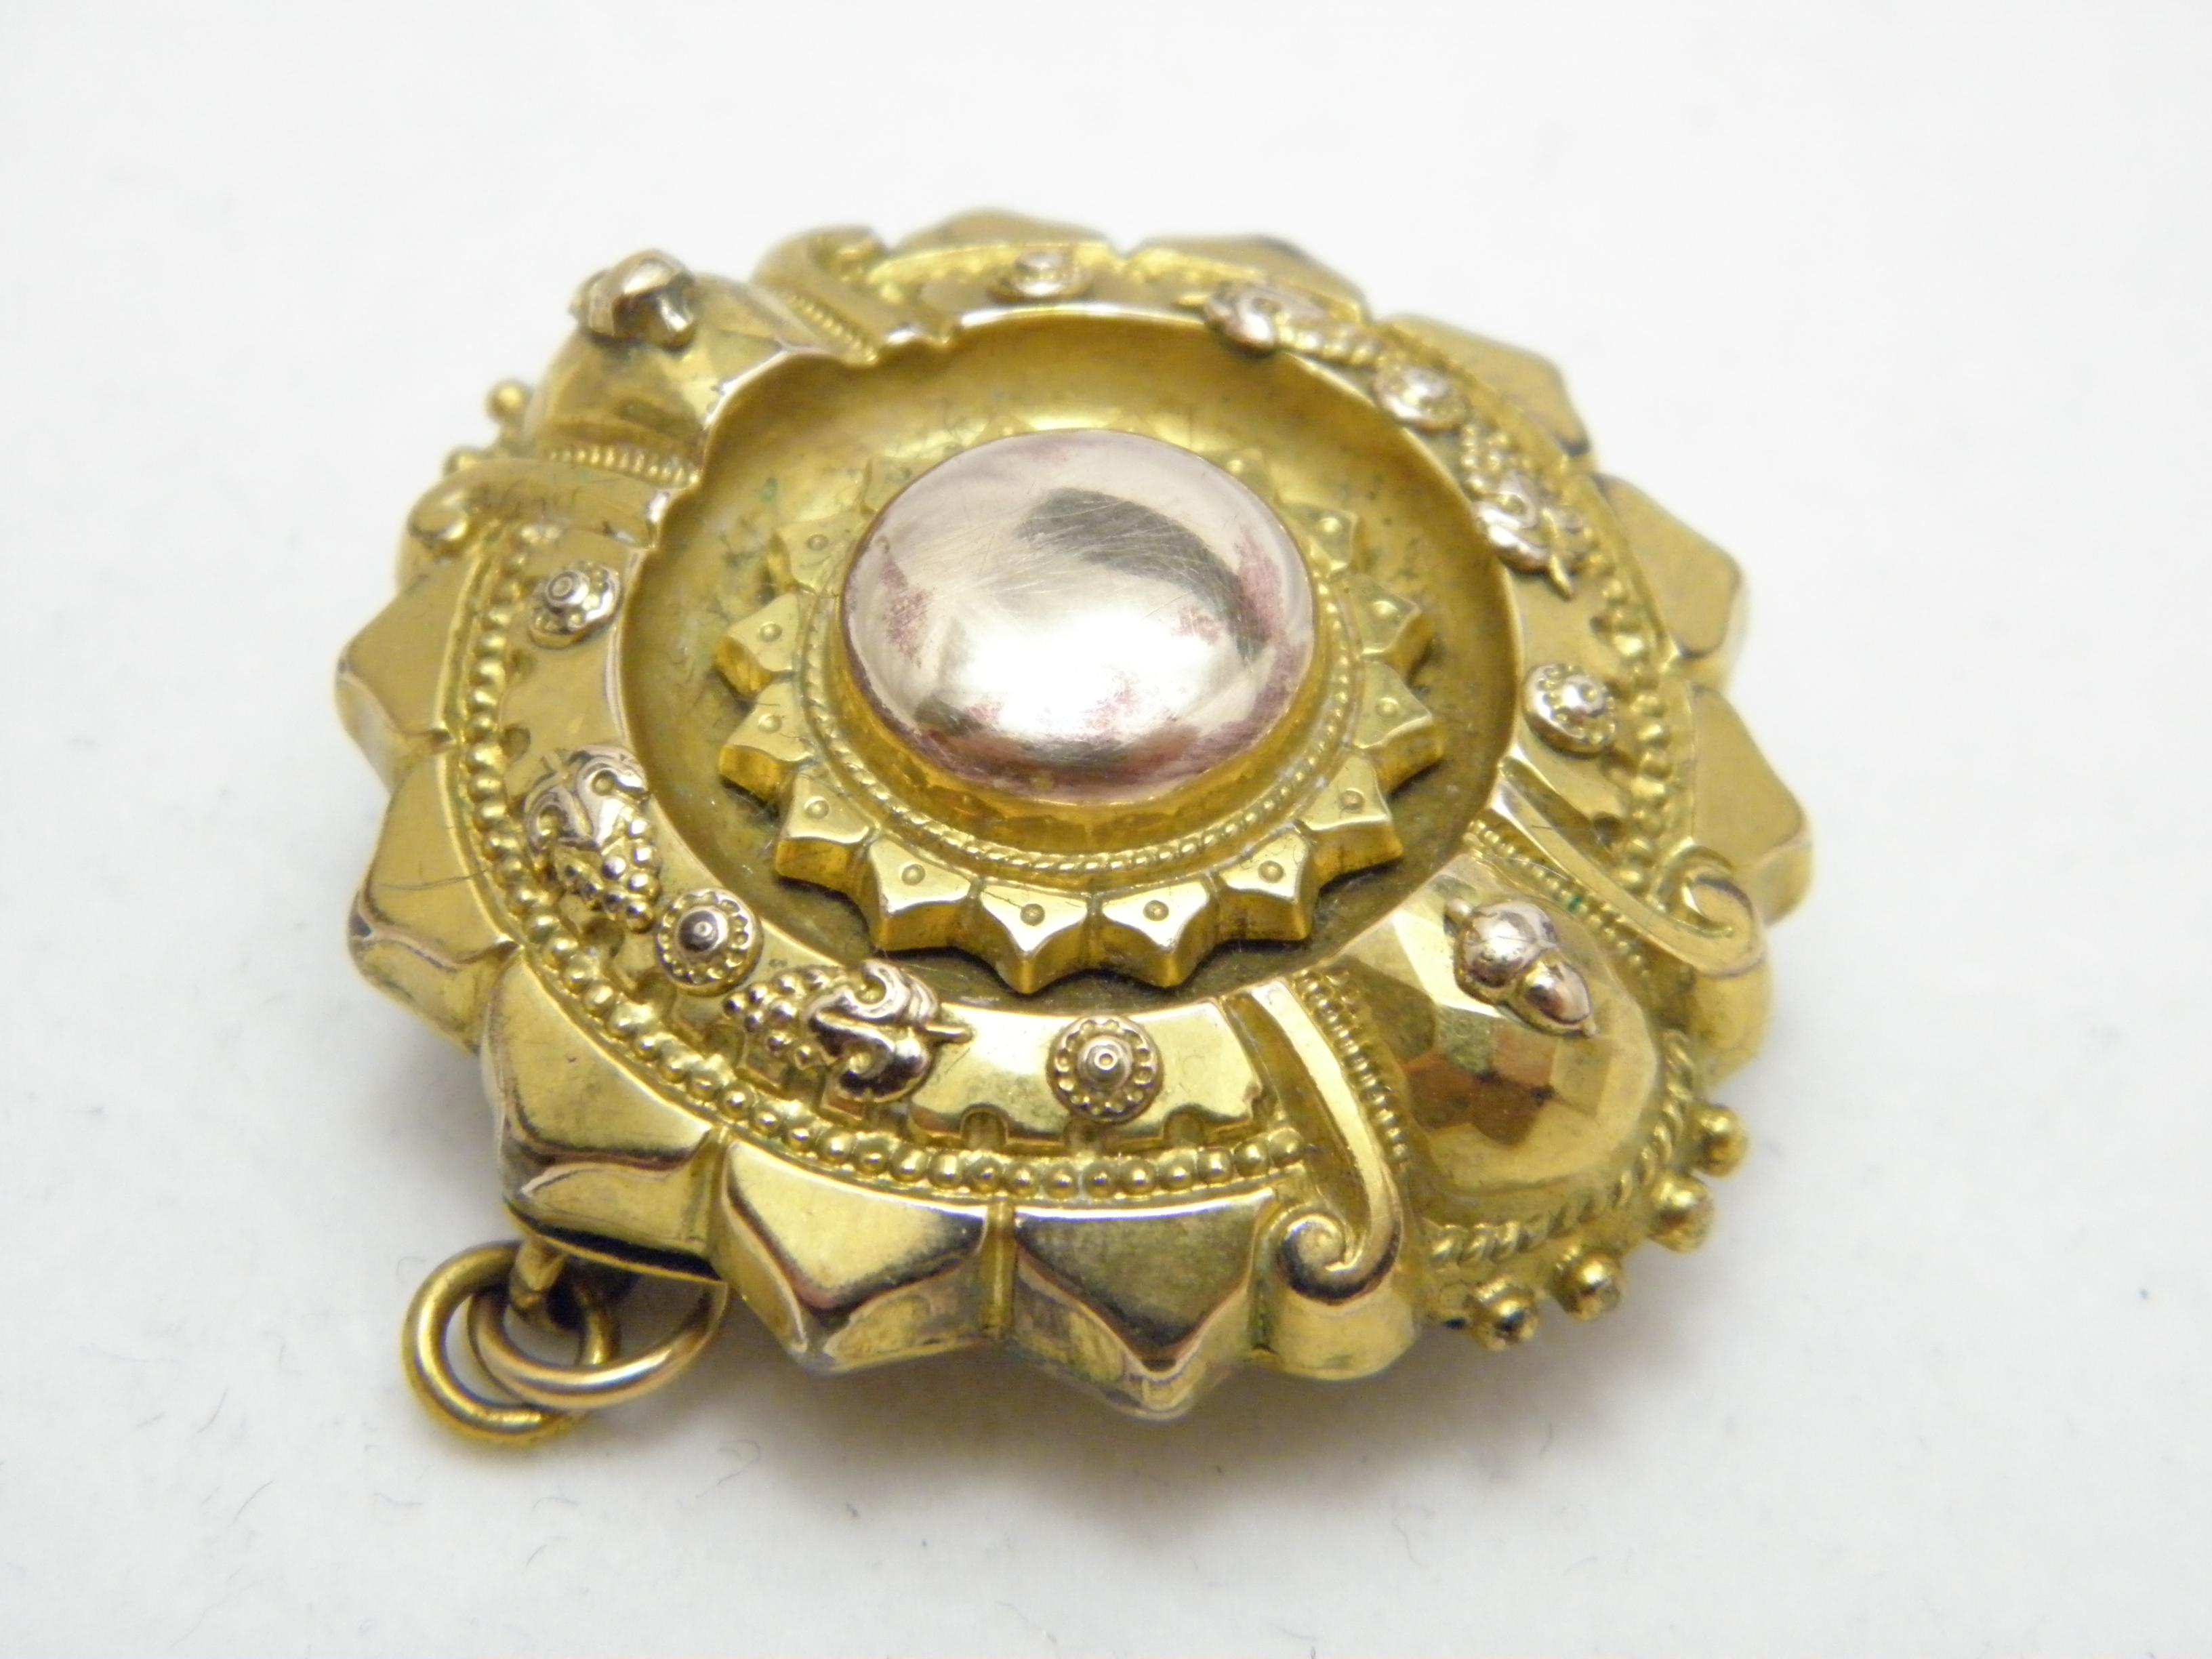 Antique 15ct Gold Locket Photo Target Brooch Pin c1810 Heavy 10g 625 Purity For Sale 1